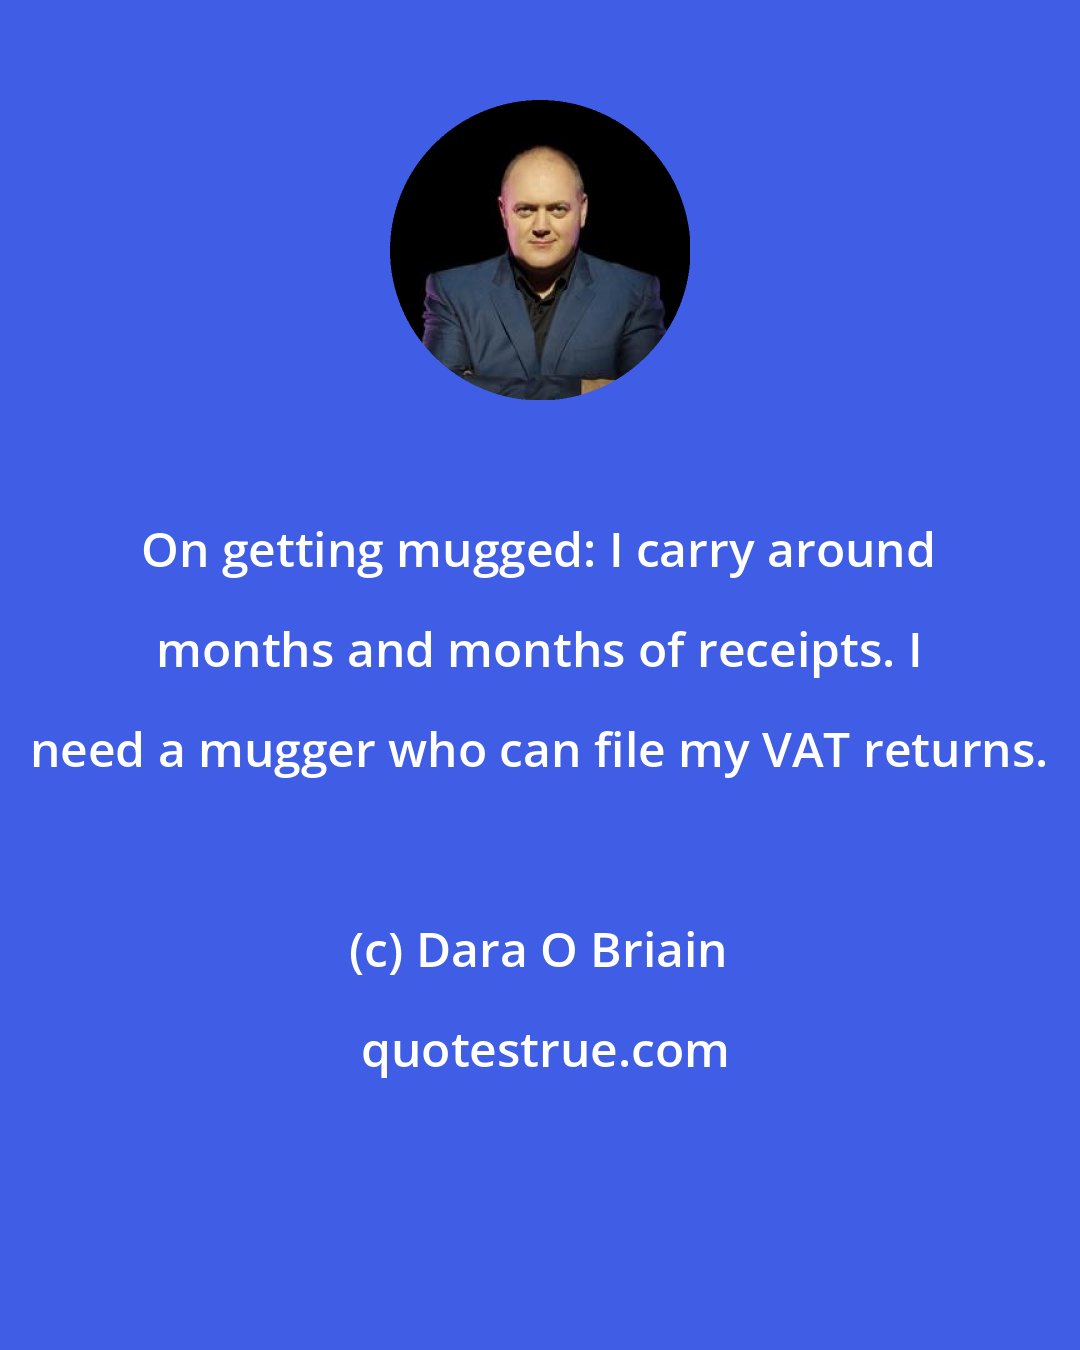 Dara O Briain: On getting mugged: I carry around months and months of receipts. I need a mugger who can file my VAT returns.